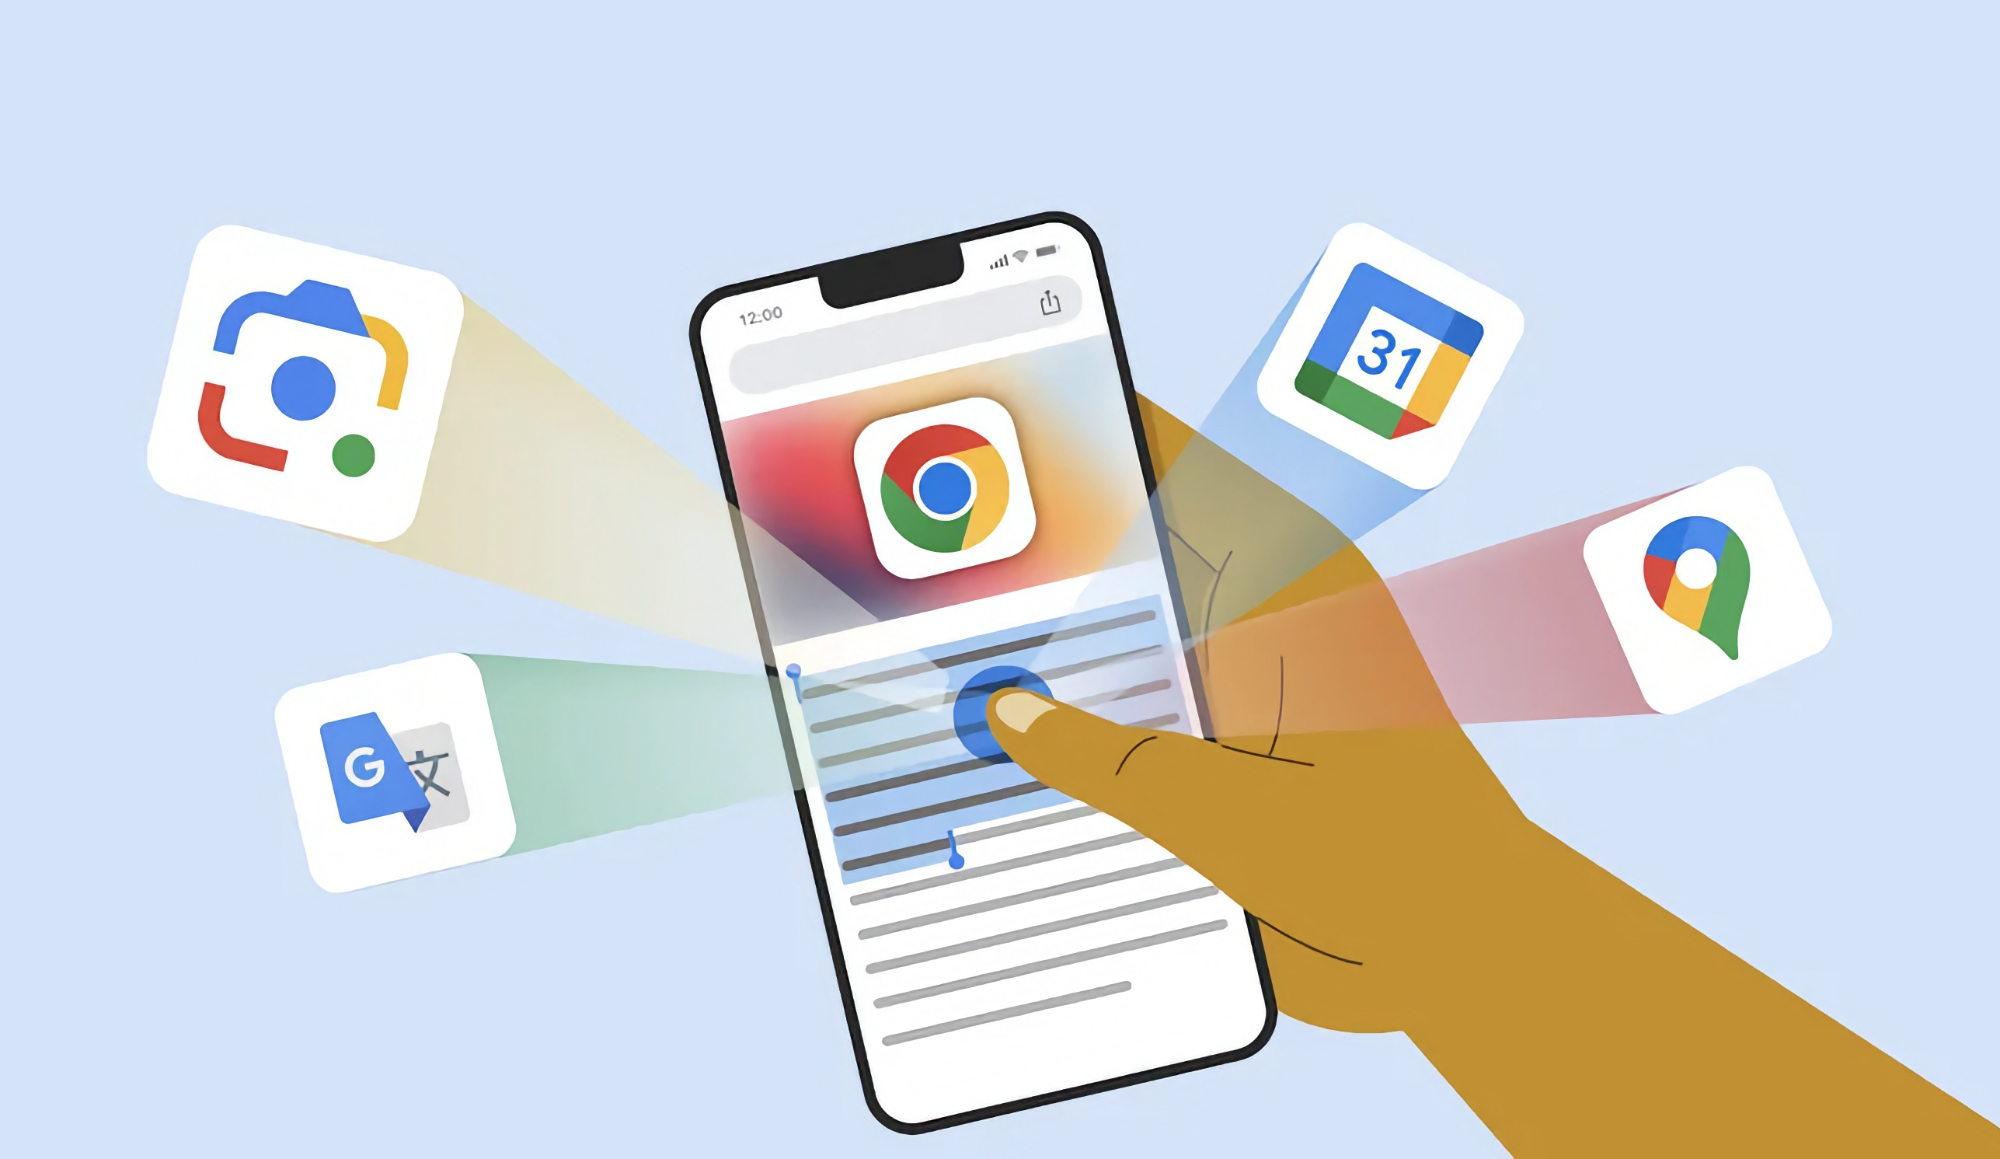 Improved Google Lens and integration with Google Maps: Google introduced a new version of Chrome for iOS